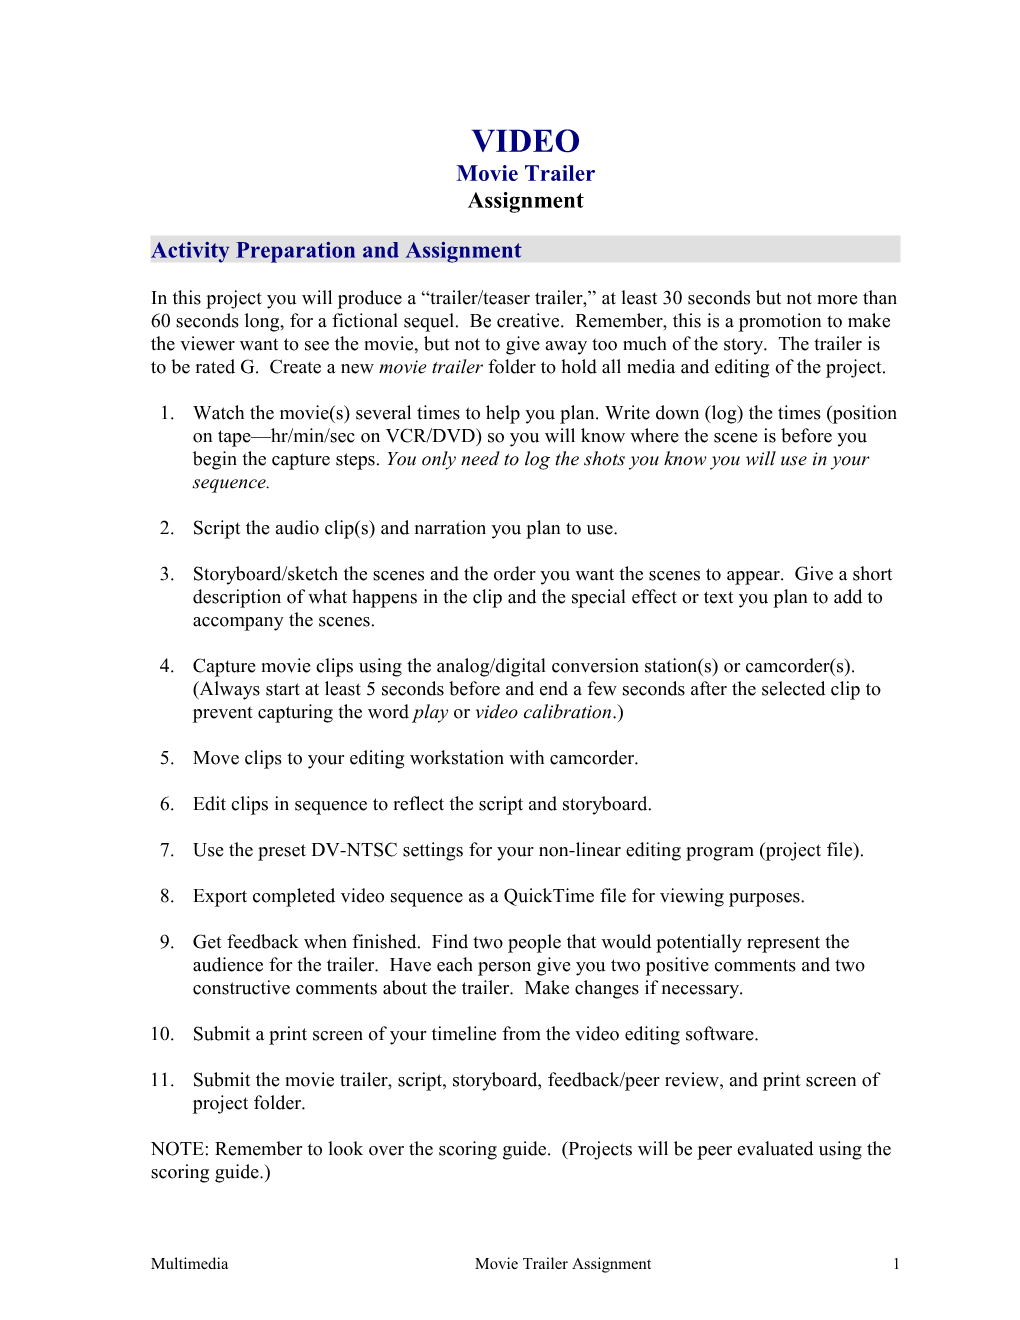 Activity Preparation and Assignment